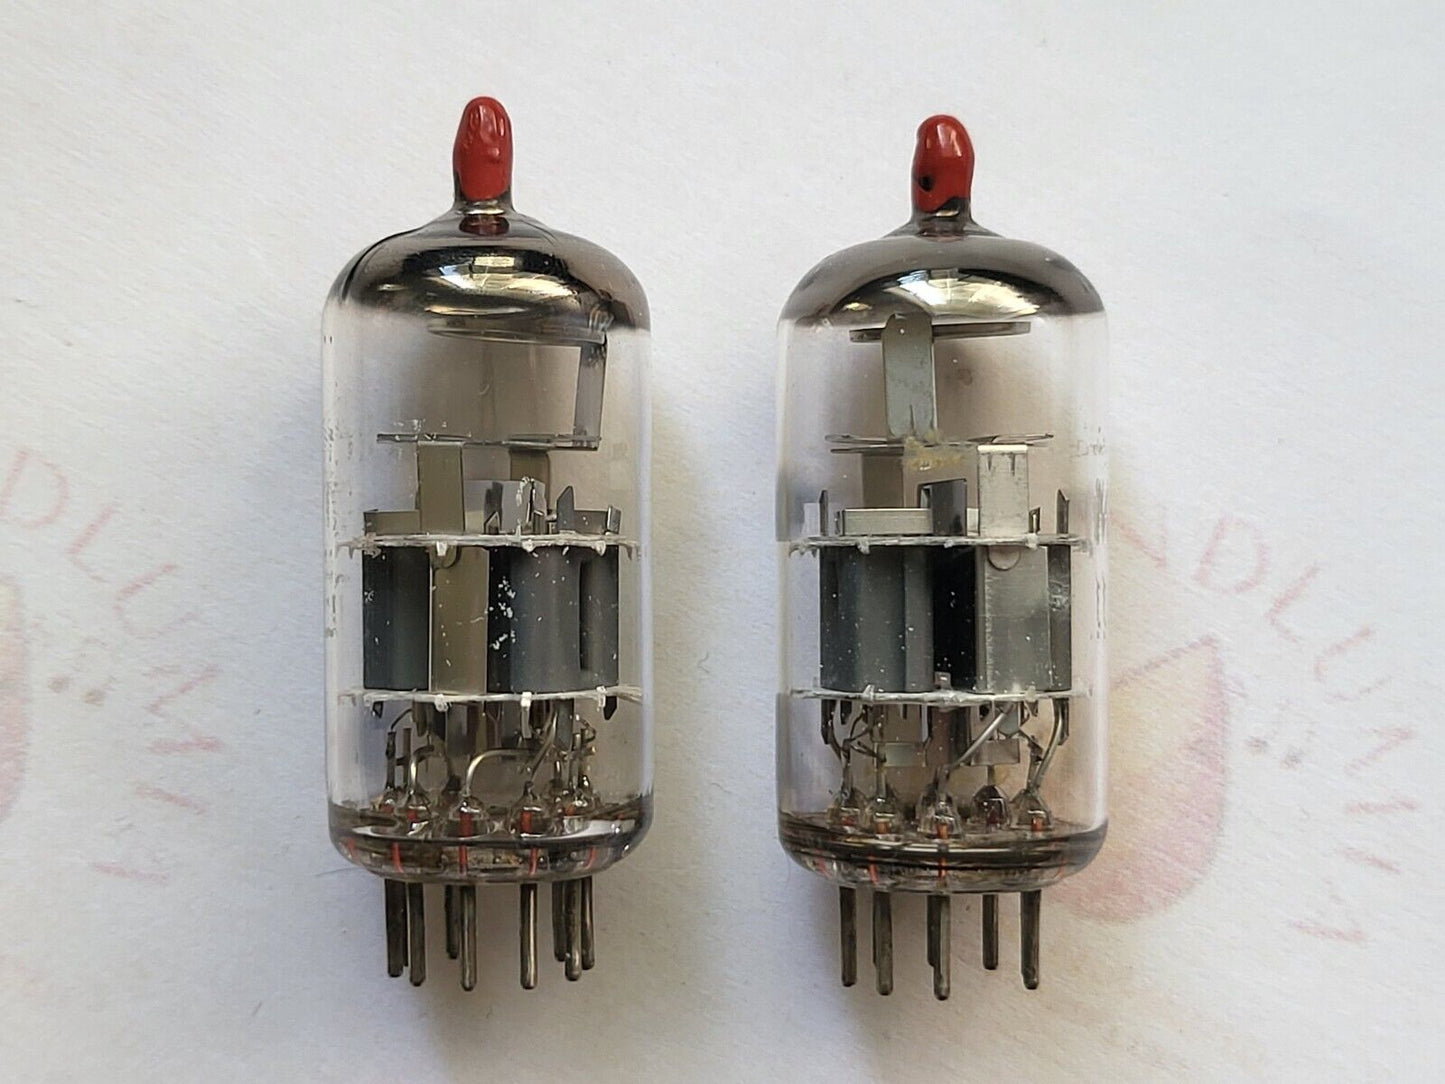 Philips ECC88 6DJ8 Red Tip Select Tubes Matched Pair - Holland 1966/67 - NOS